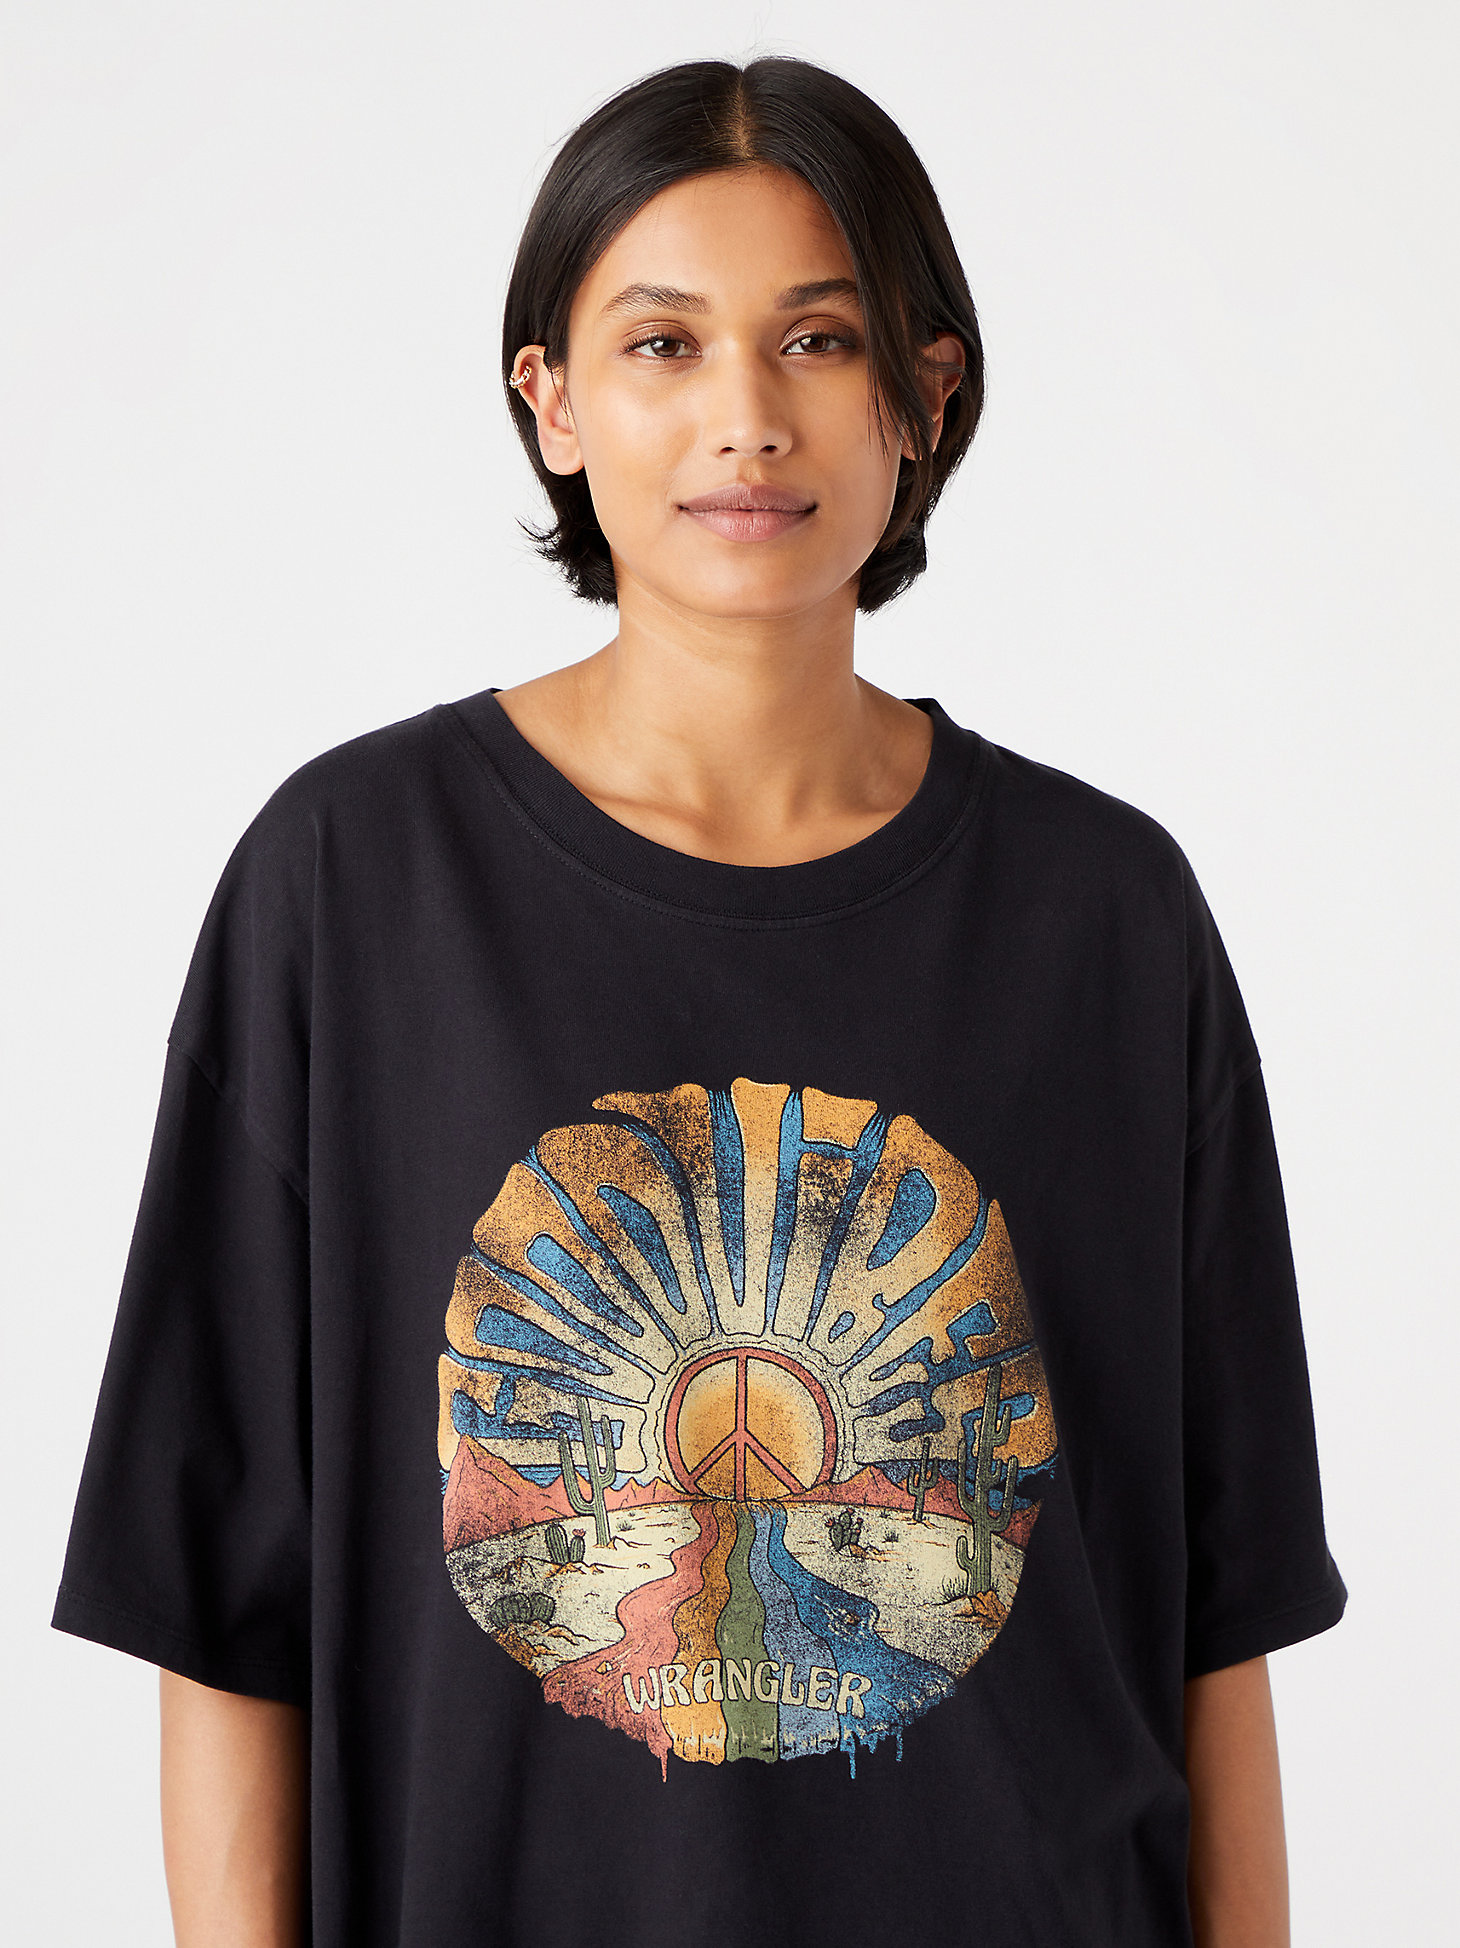 Women's Oversized Good Vibes Tee in Faded Black alternative view 2